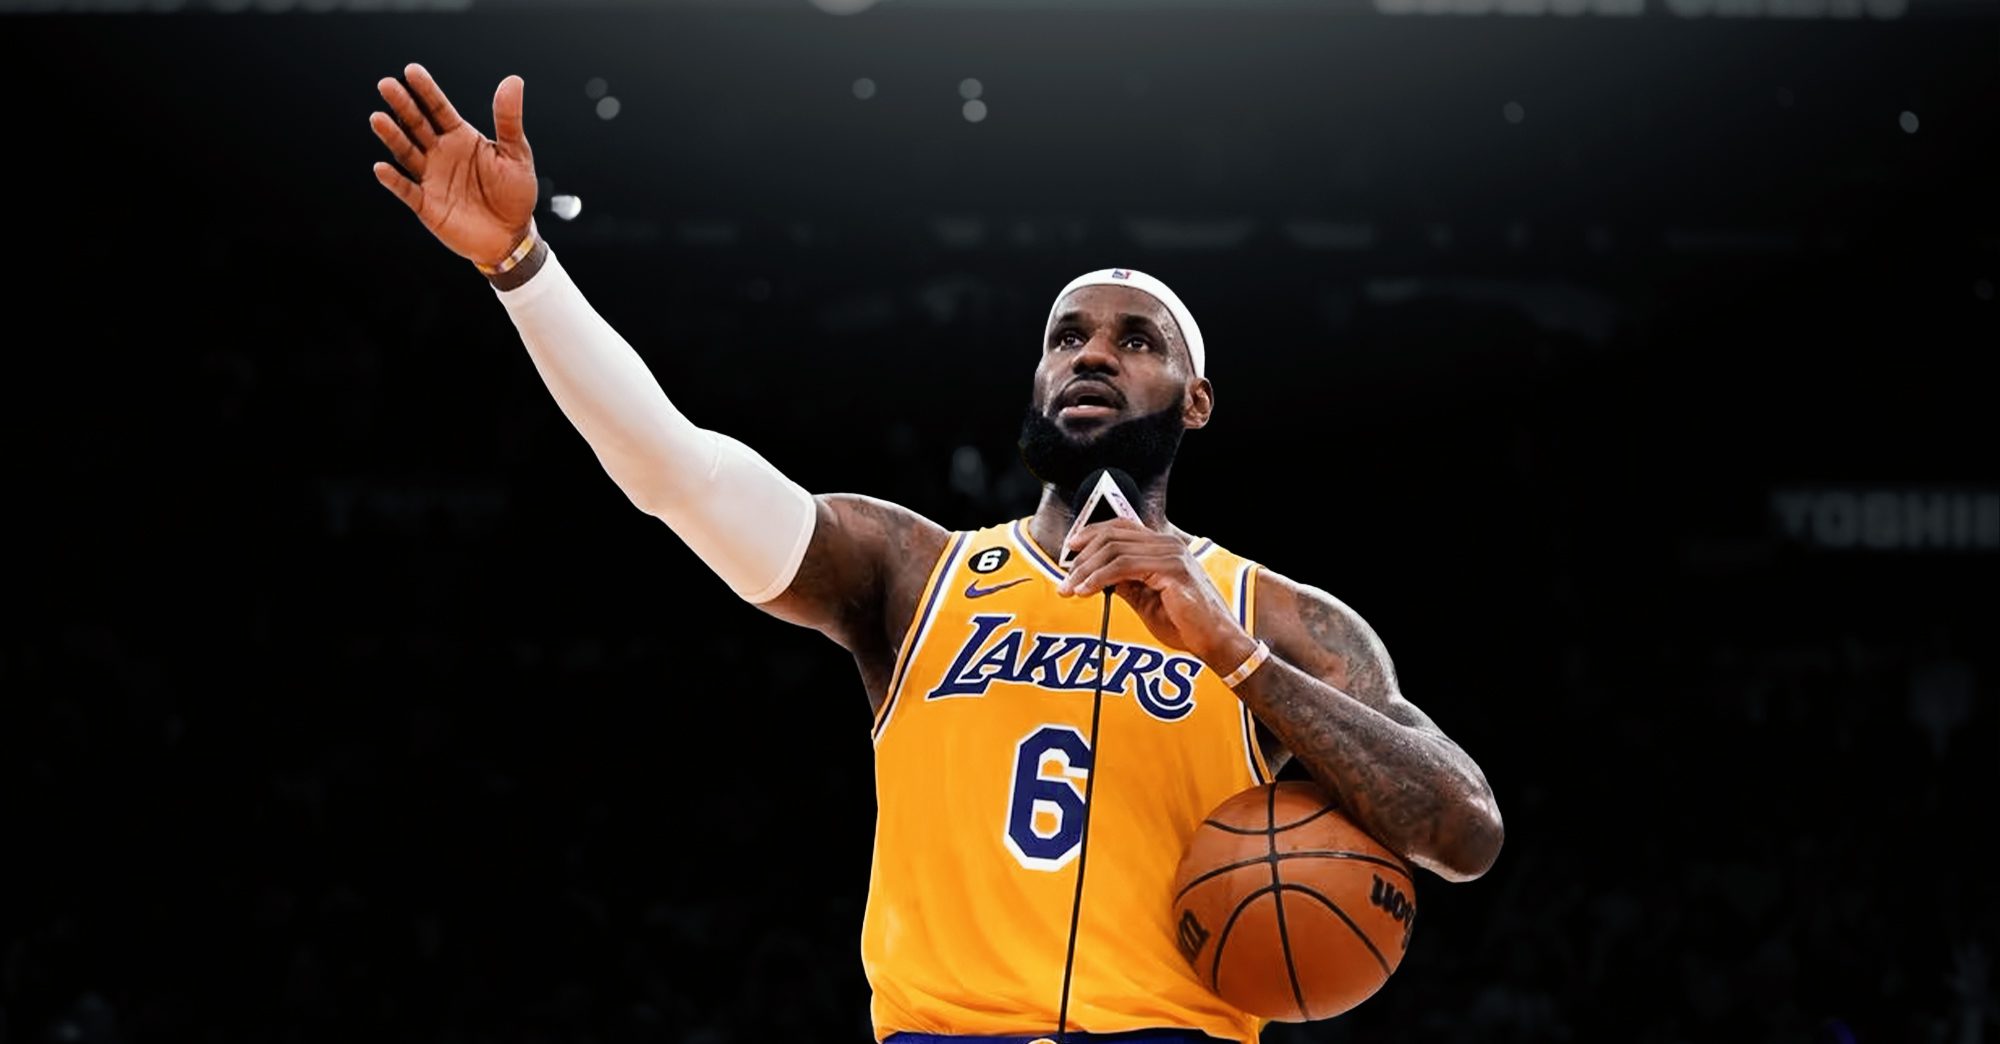 LeBron James ‘Privately Questioned’ His Acceptance by Lakers Fans: Report